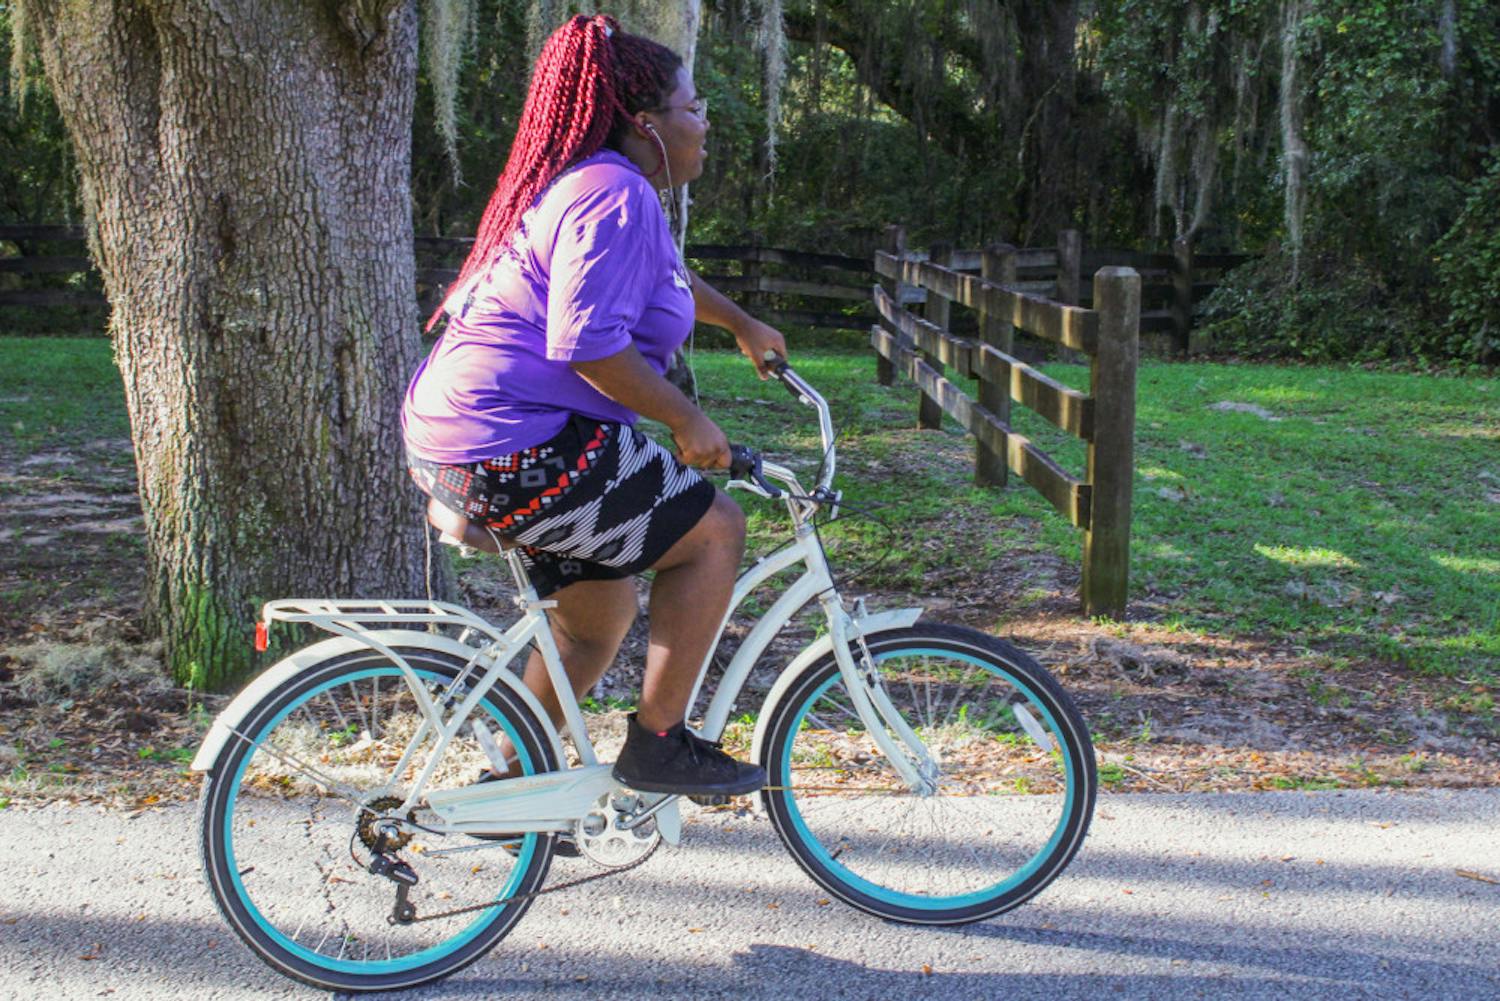 Tamaria Henderson rides her bicycle to support Metamorphosis of Alachua County, the treatment center where she currently lives and battles her alcohol addiction. “You have to want it,” the 20-year-old said.